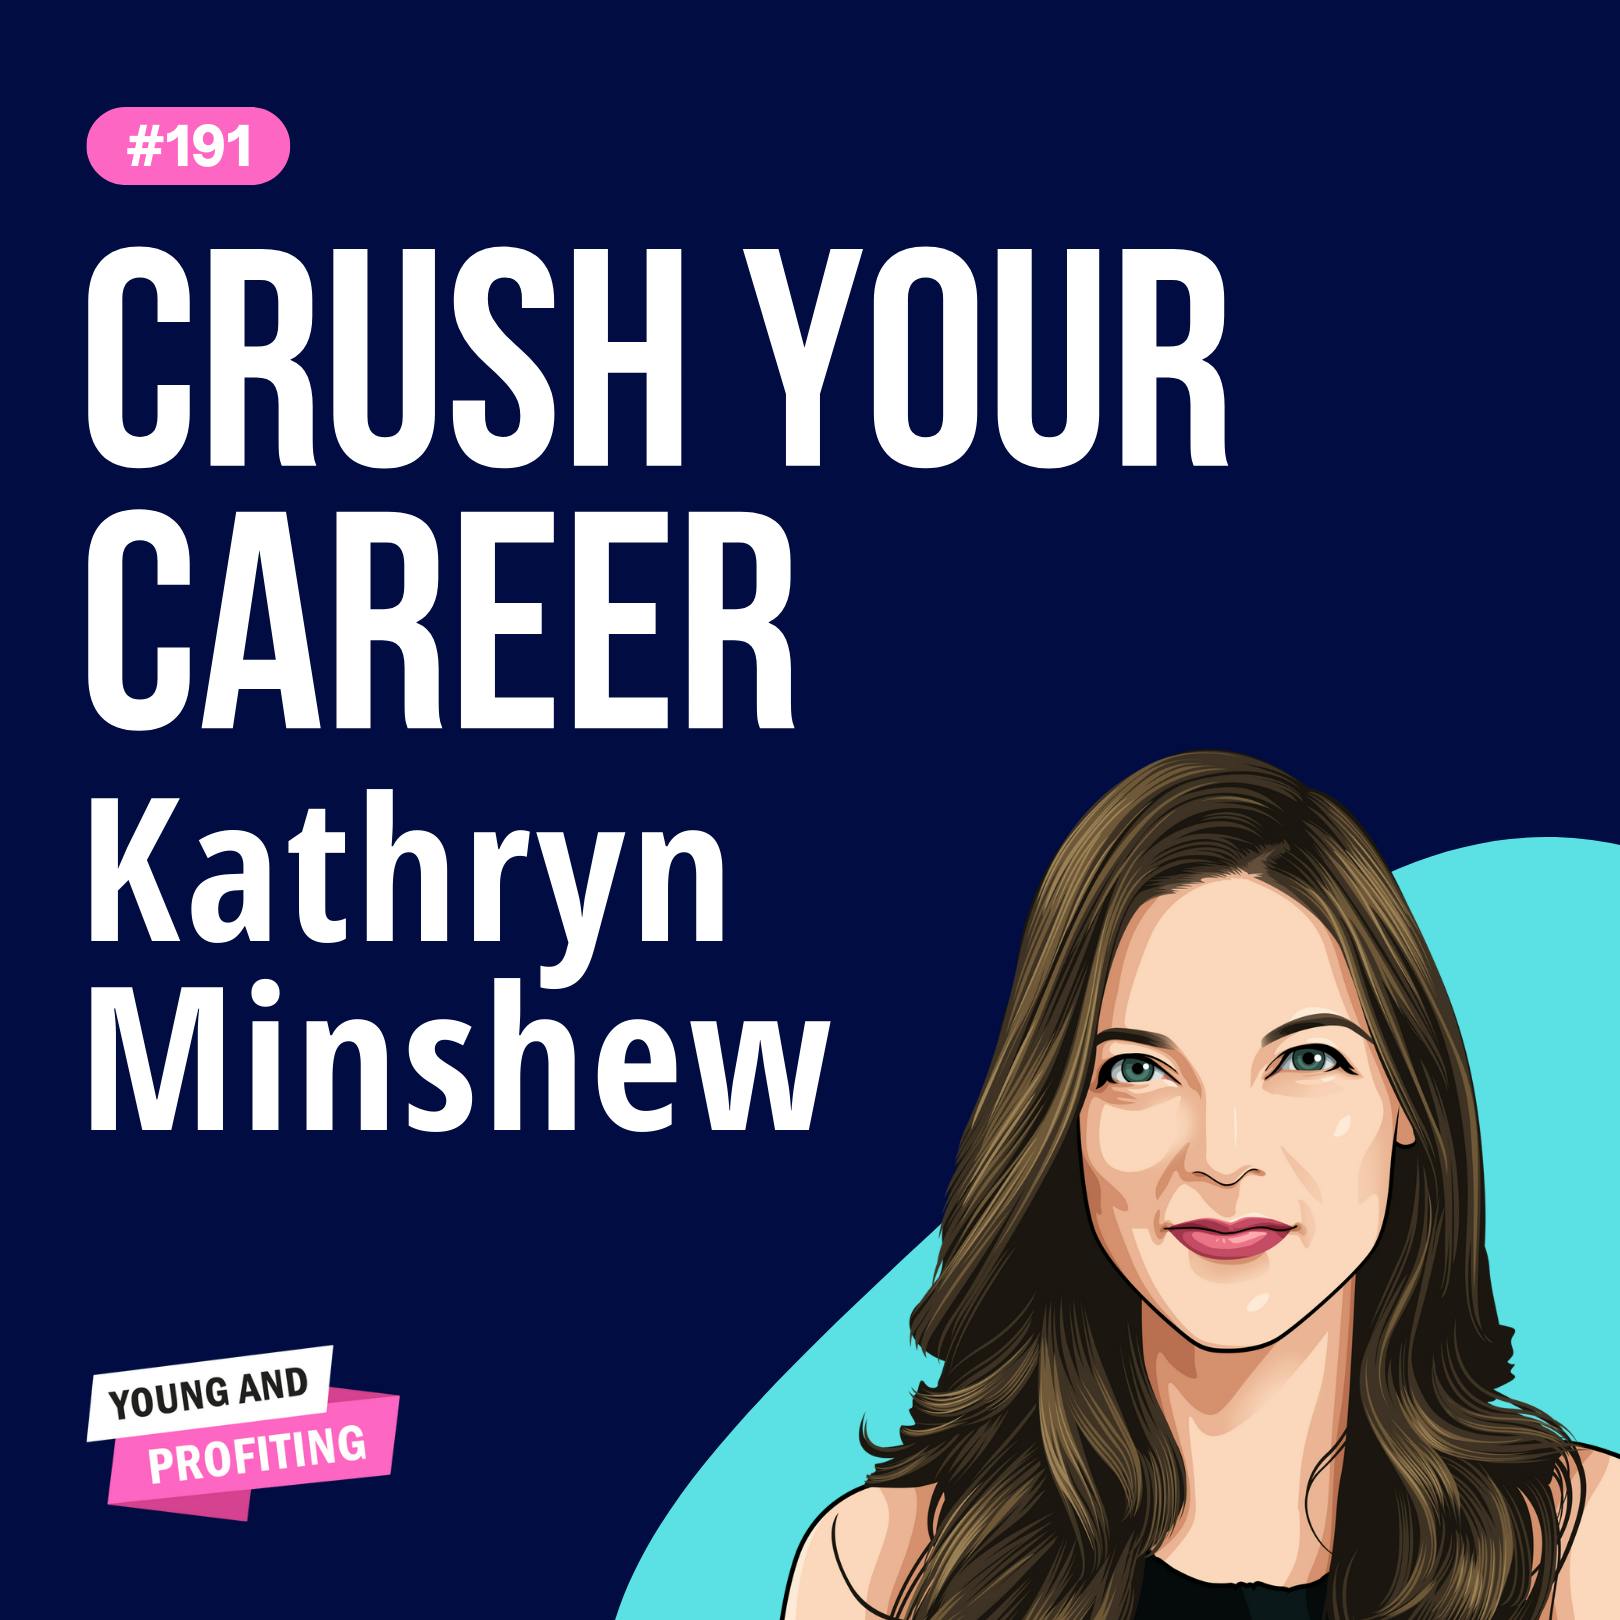 Kathryn Minshew: Crush Your Career, Beat Burnout, and Learn to Navigate the New Rules of Work | EP 191 by Hala Taha | YAP Media Network